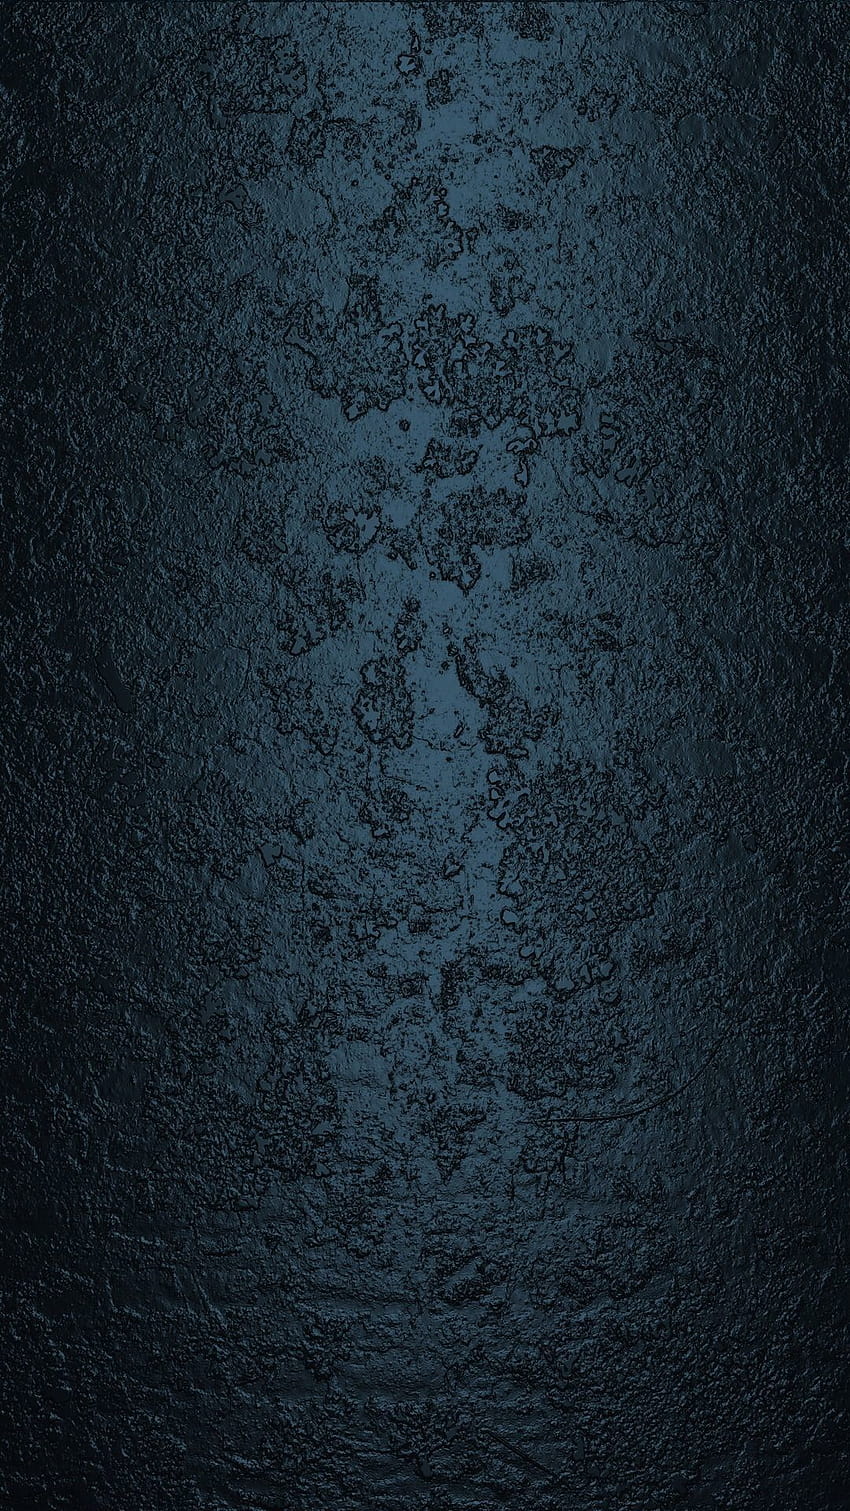 Navy smooth wall textured background  free image by rawpixelcom  Navy  blue background Textured background Dark blue background